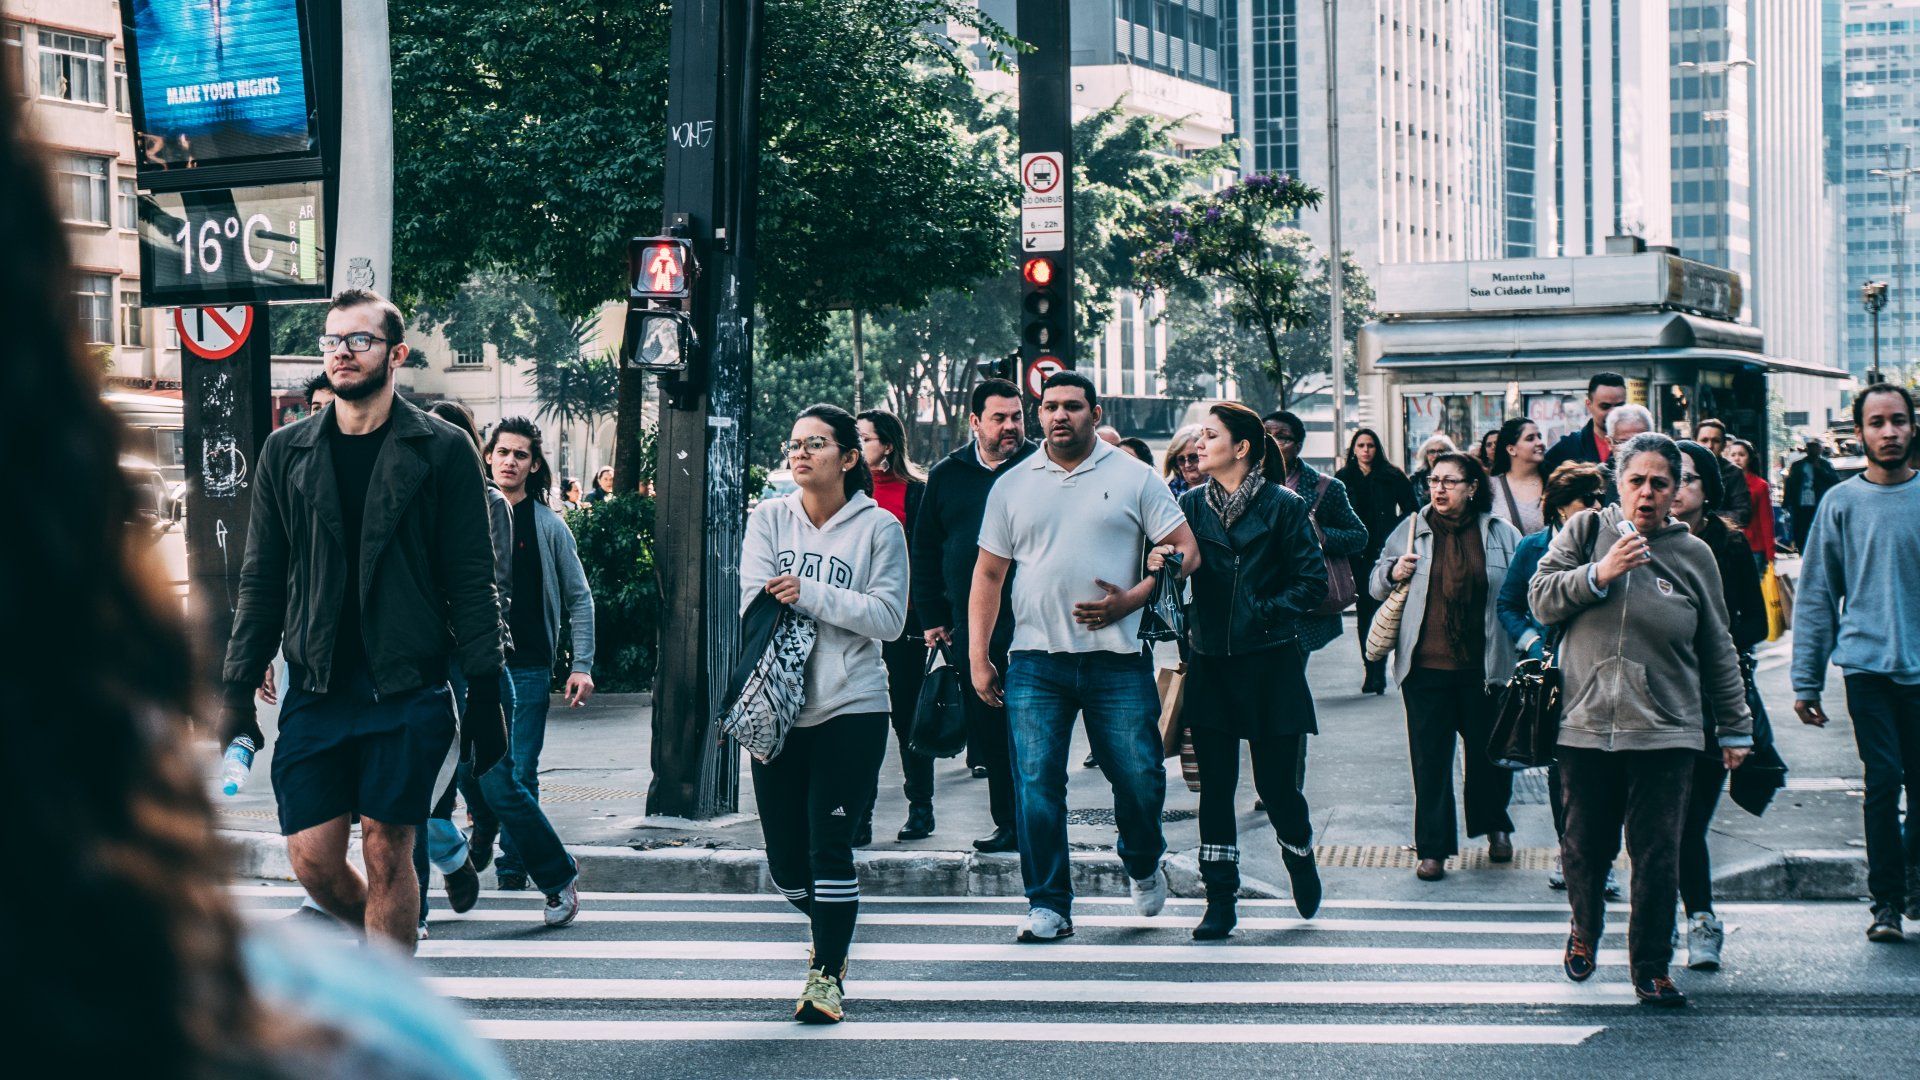 a large group of people are crossing a street in a city .